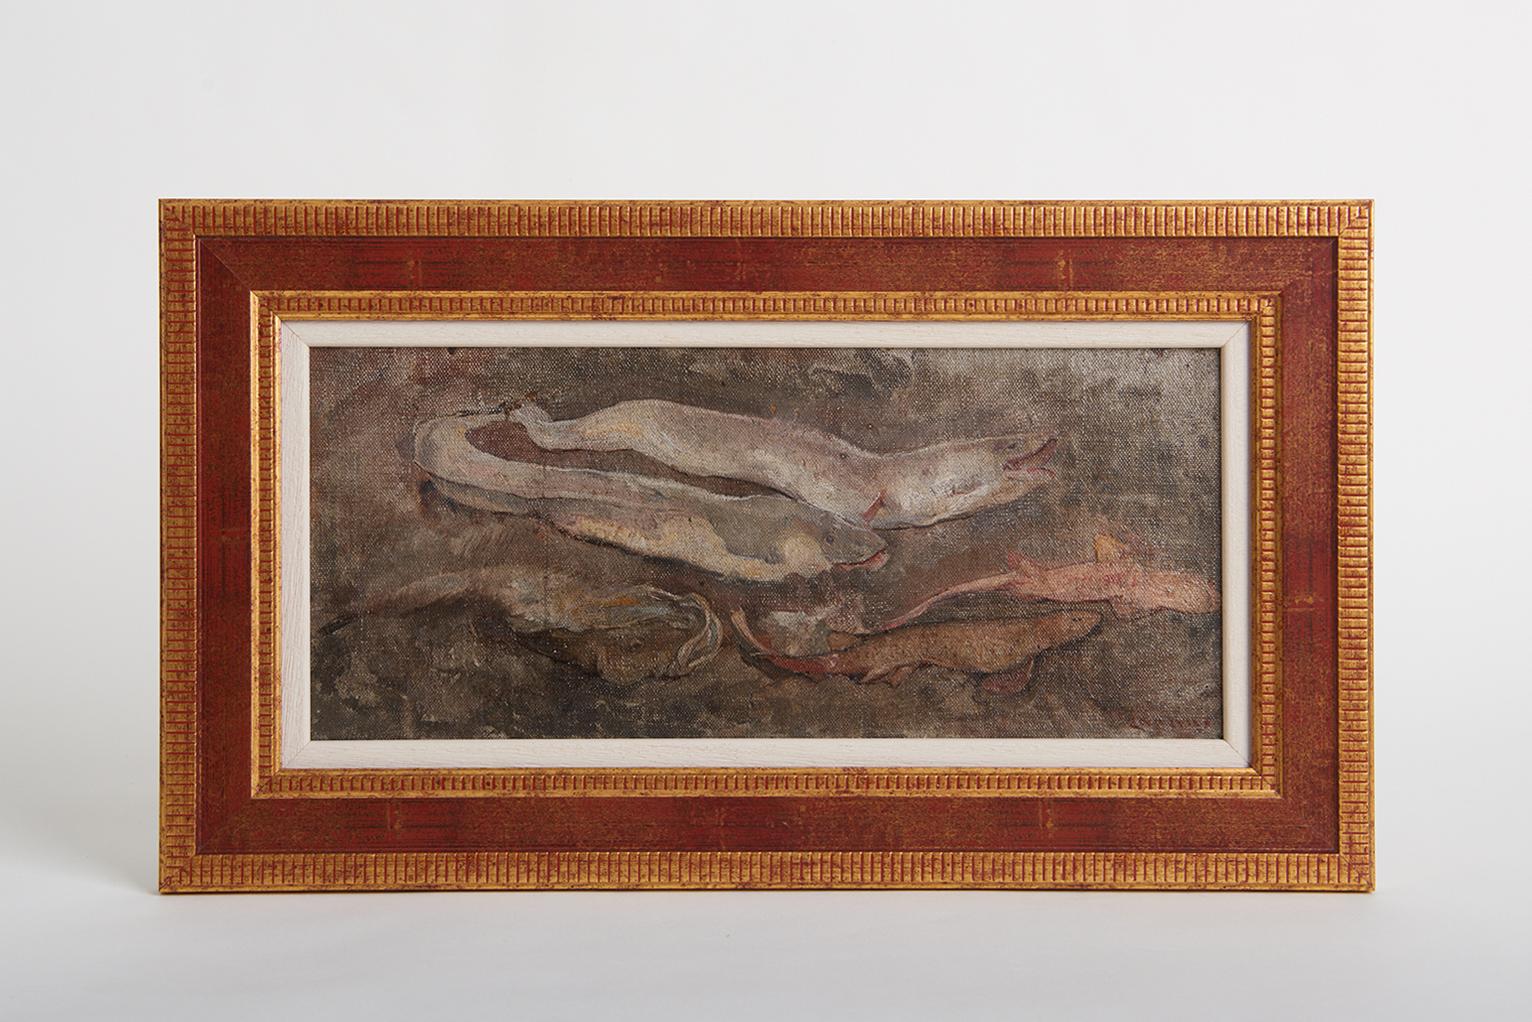 Paul-Albert Laurens (1870-1934)
Oil on canvas, marouflage on wooden panel. Depicting catsharks, morays and burbots.
France, late 19th-early 20th century.